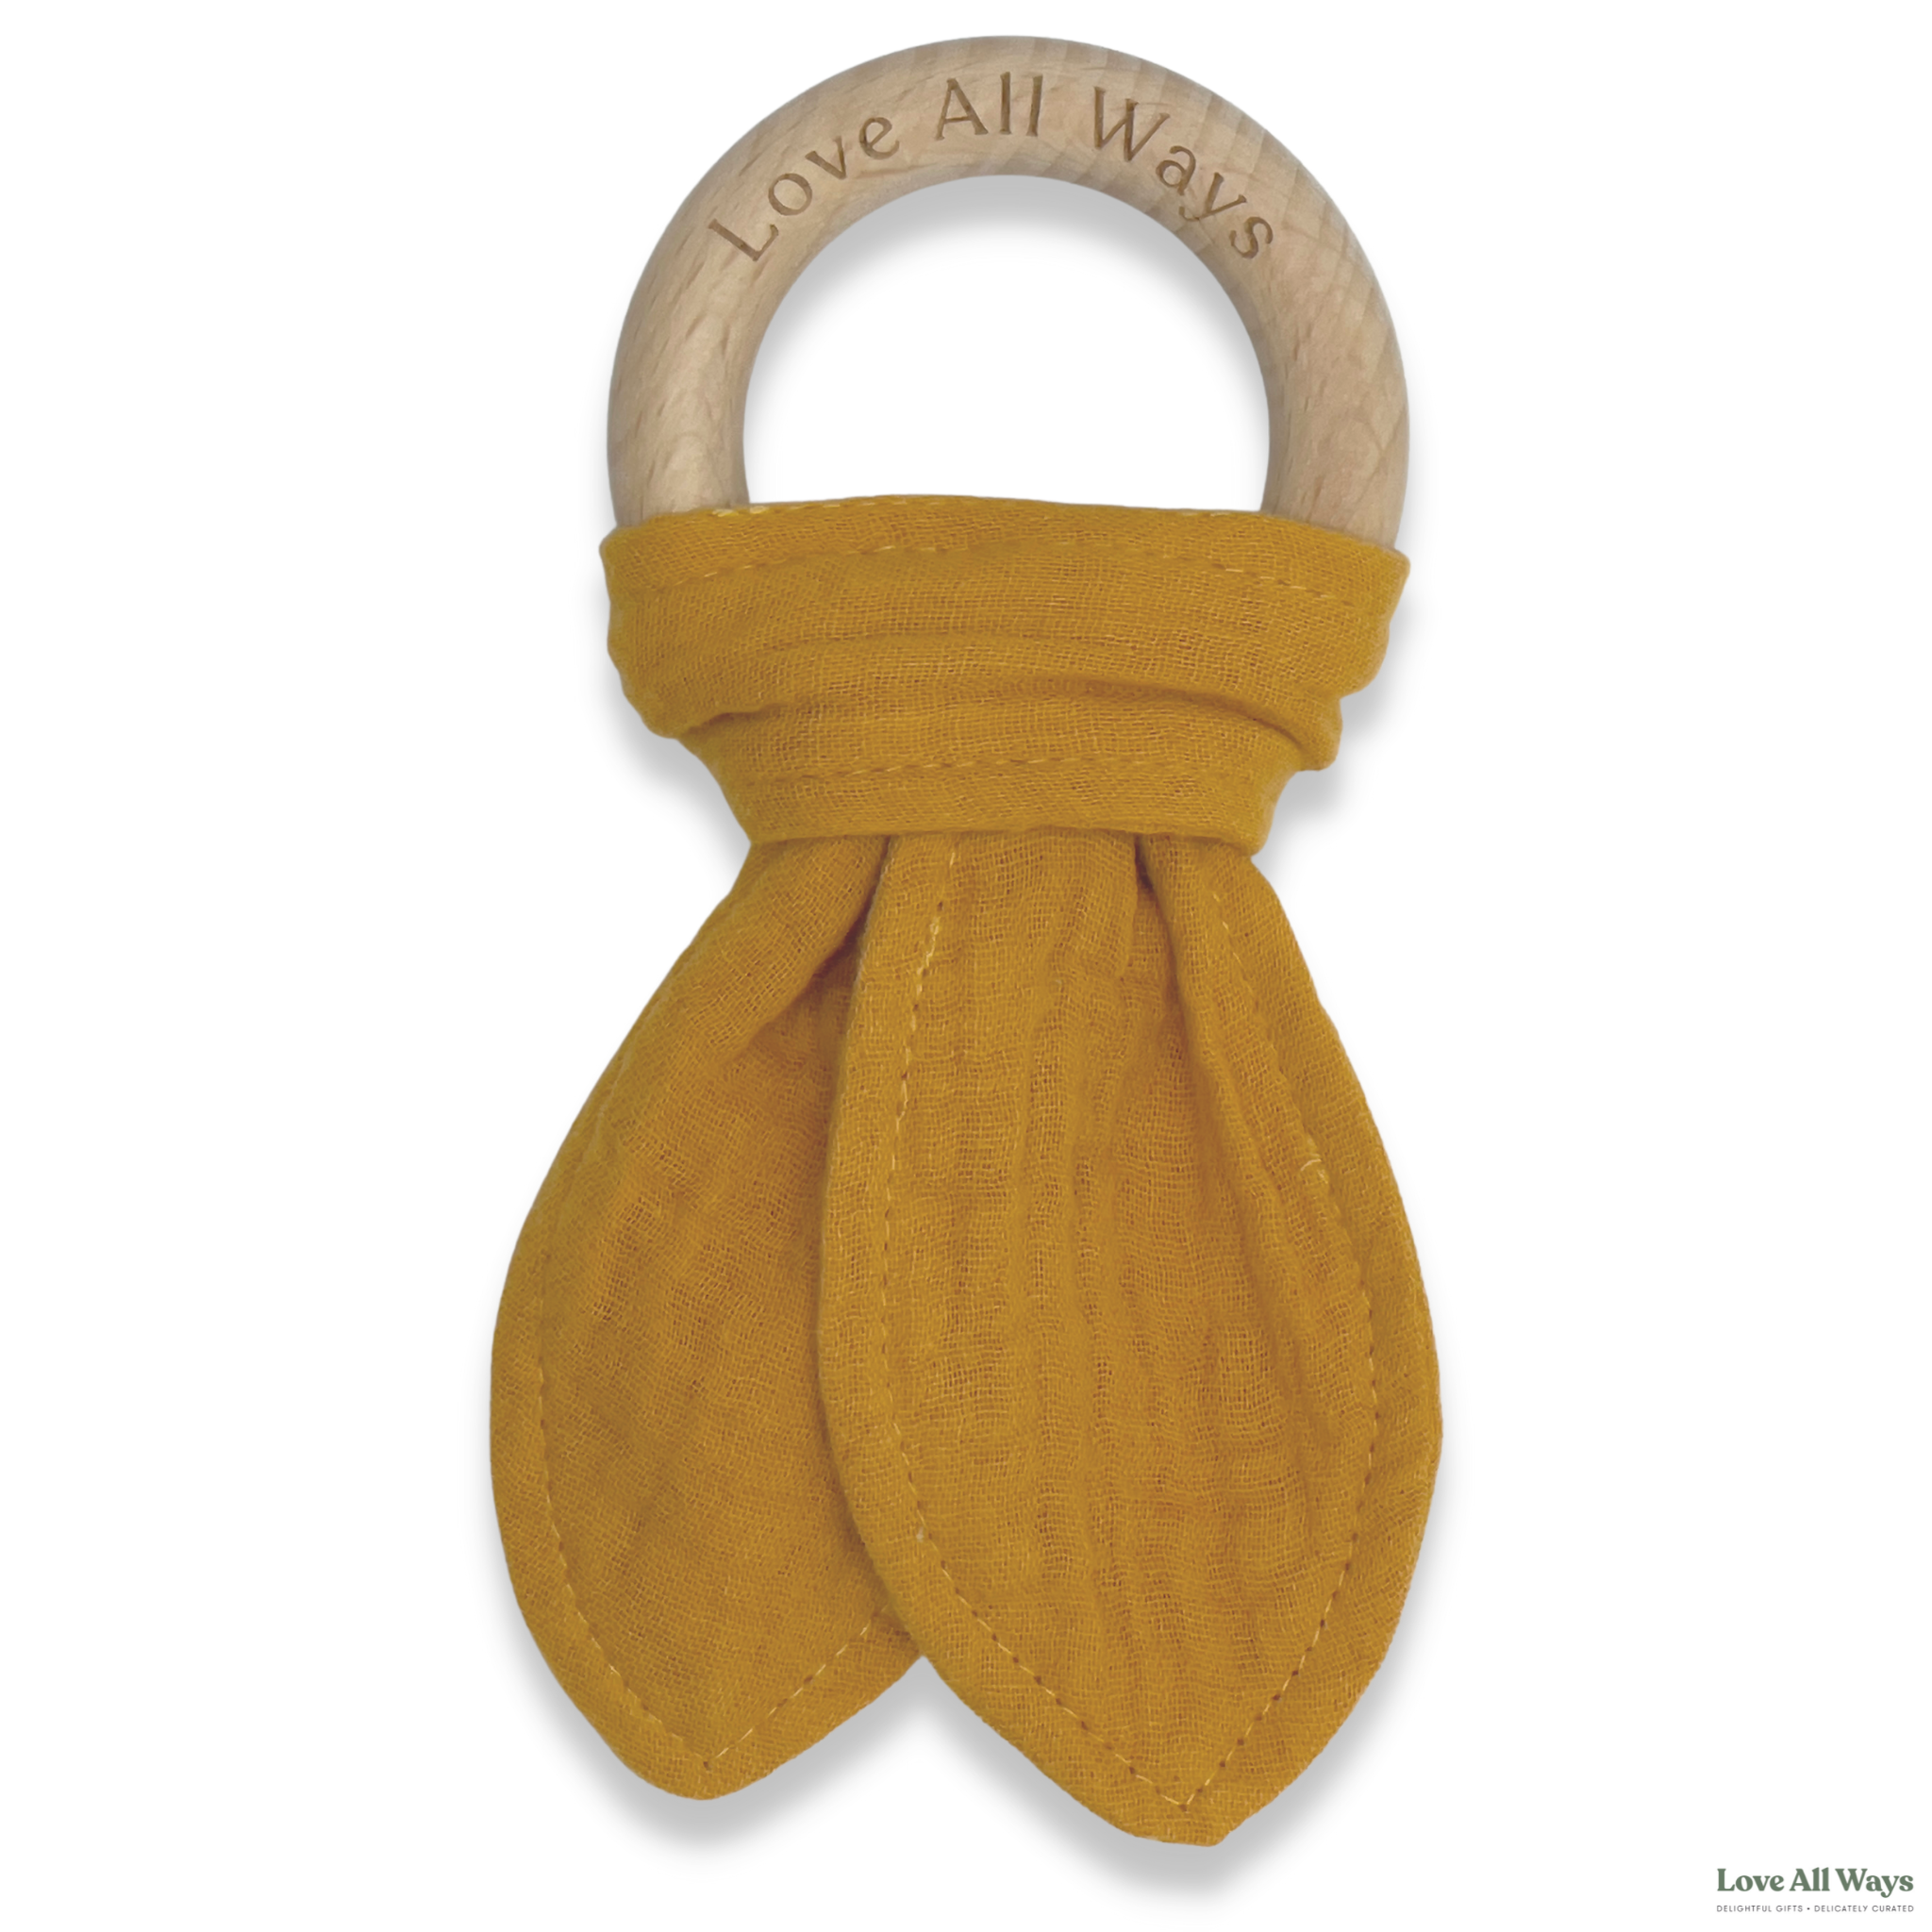 Love All Ways Beechwood Organic Cotton Teether - Bronze Natural, eco friendly beechwood teether designed to stimulate gums and is a beautiful teething option to keep babies entertained  Made from a chemical free, non toxic natural beechwood that is safe for babies mouth, perfect for those sore gums and budding teeth